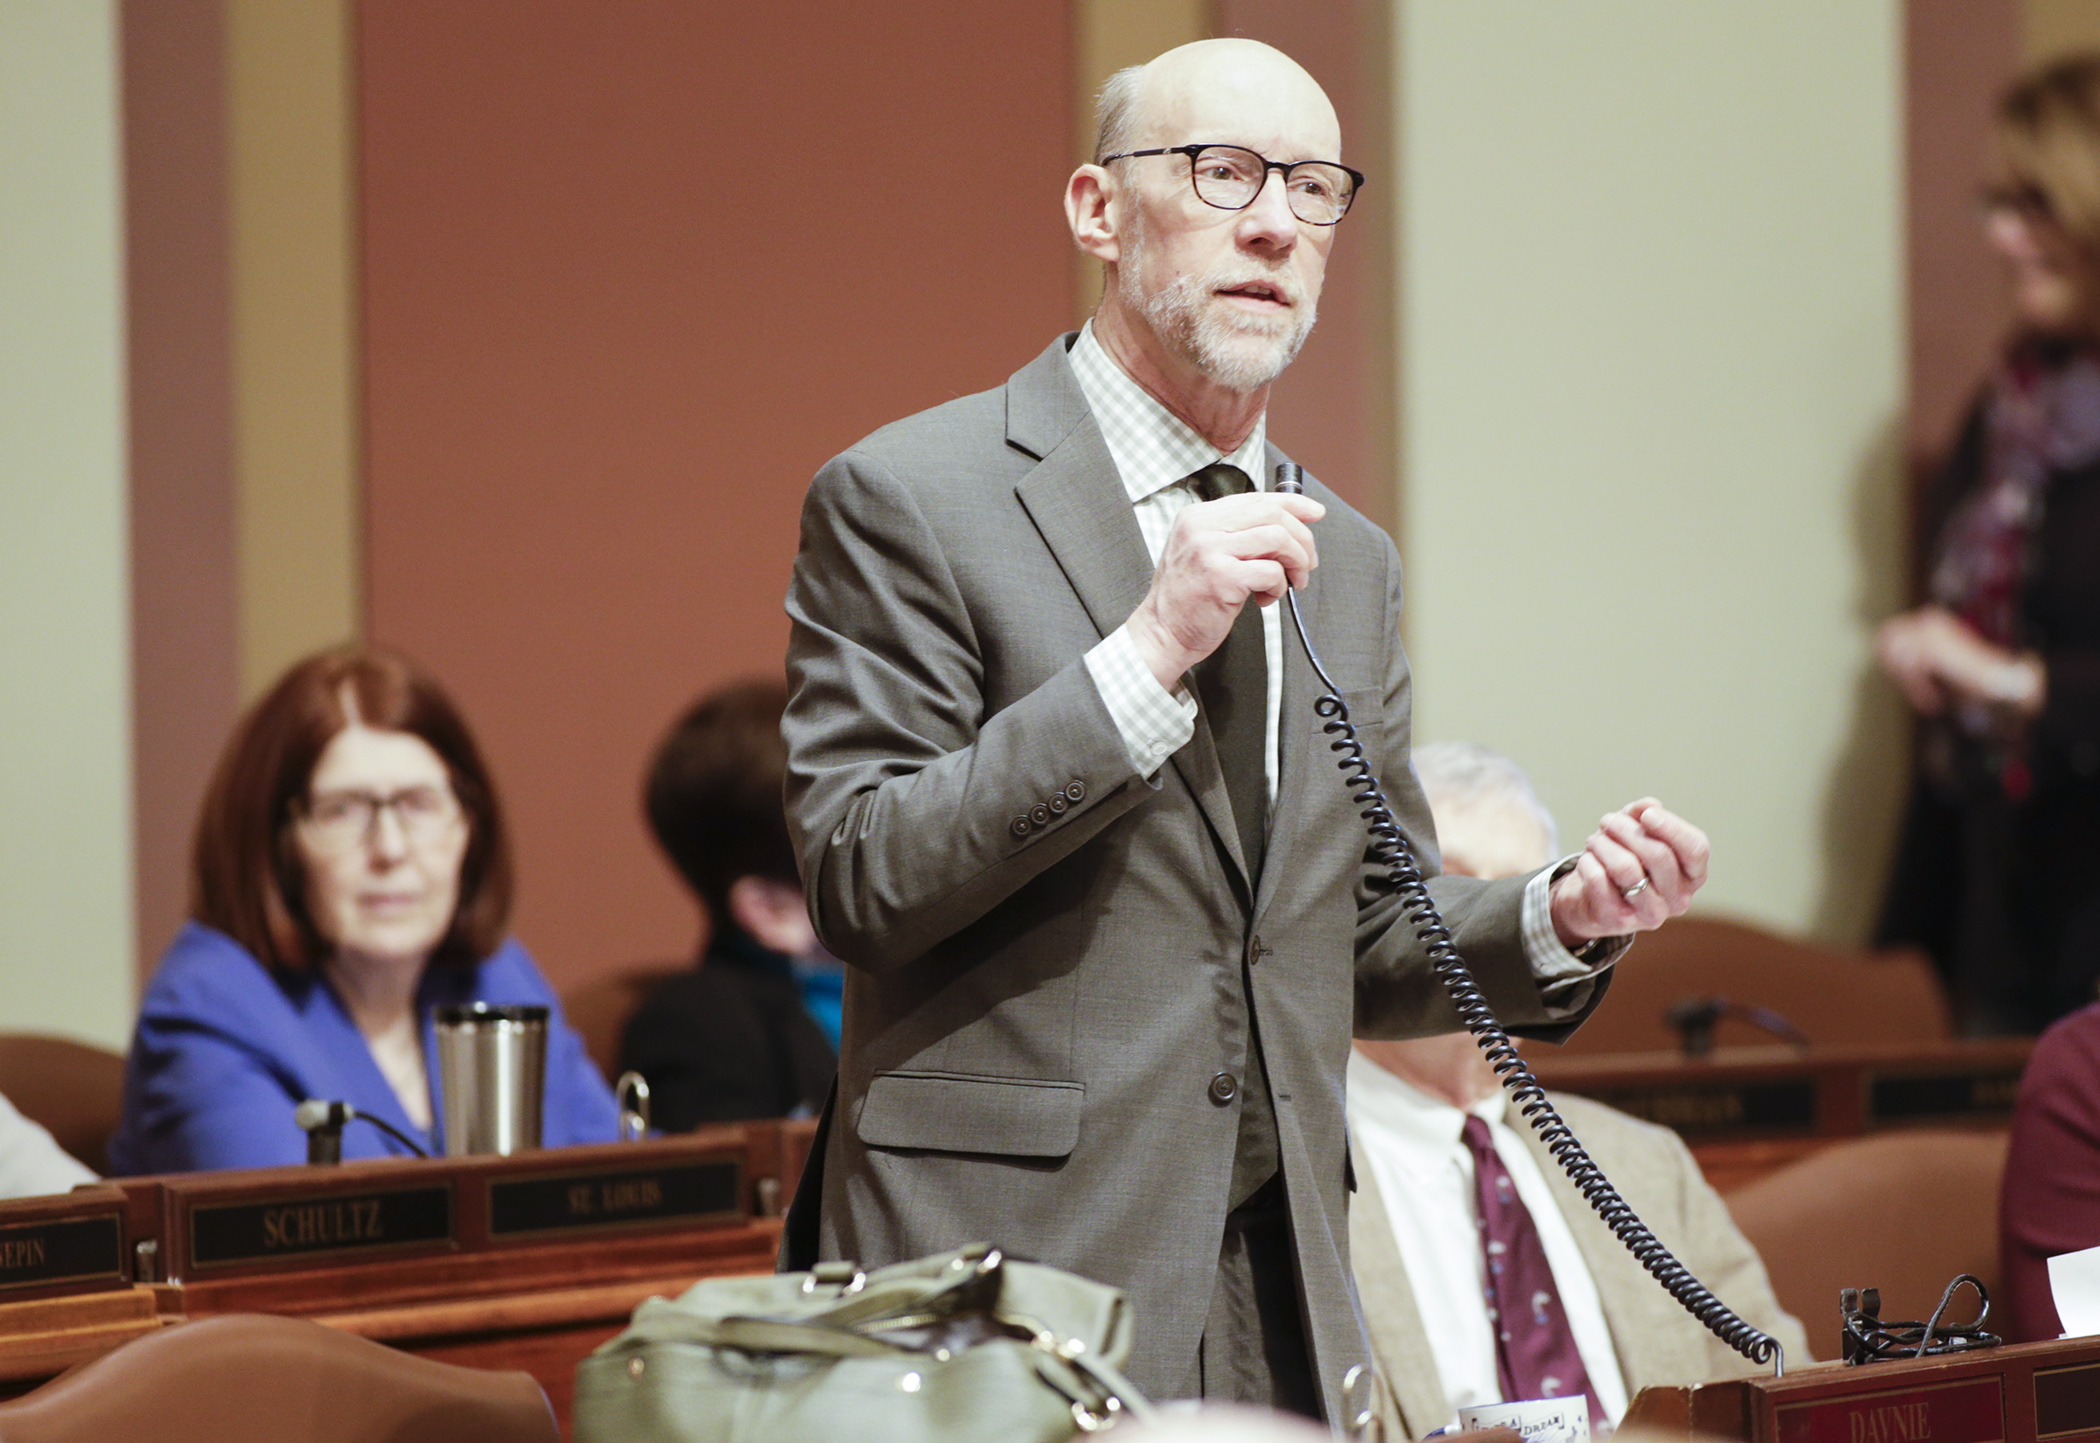 Rep. Jim Davnie explains provisions of his bill, HF51, which would create a statutory form that a homeowner could record with the county to discharge restrictive covenants affecting protected classes. Photo by Paul Battaglia